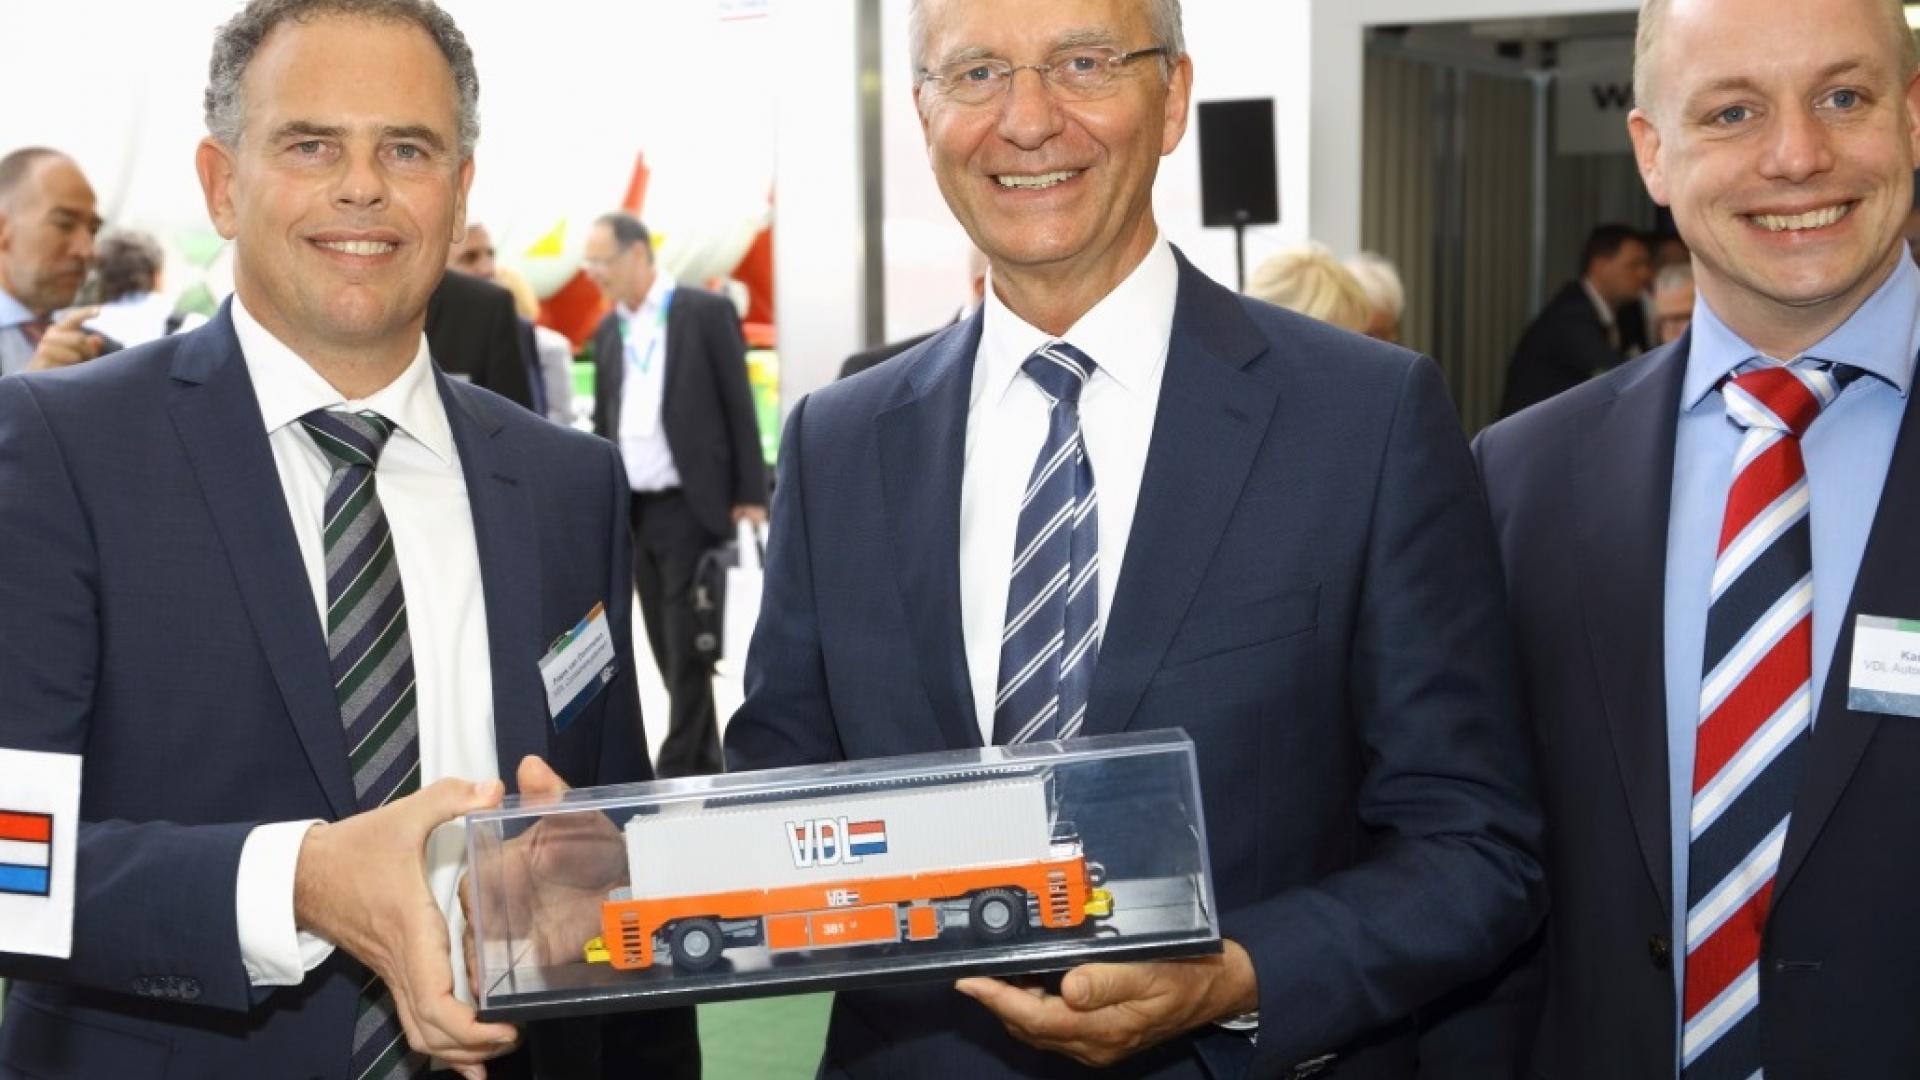 Launch of VDL AGV in mixed traffic at Transport Logistic Munich